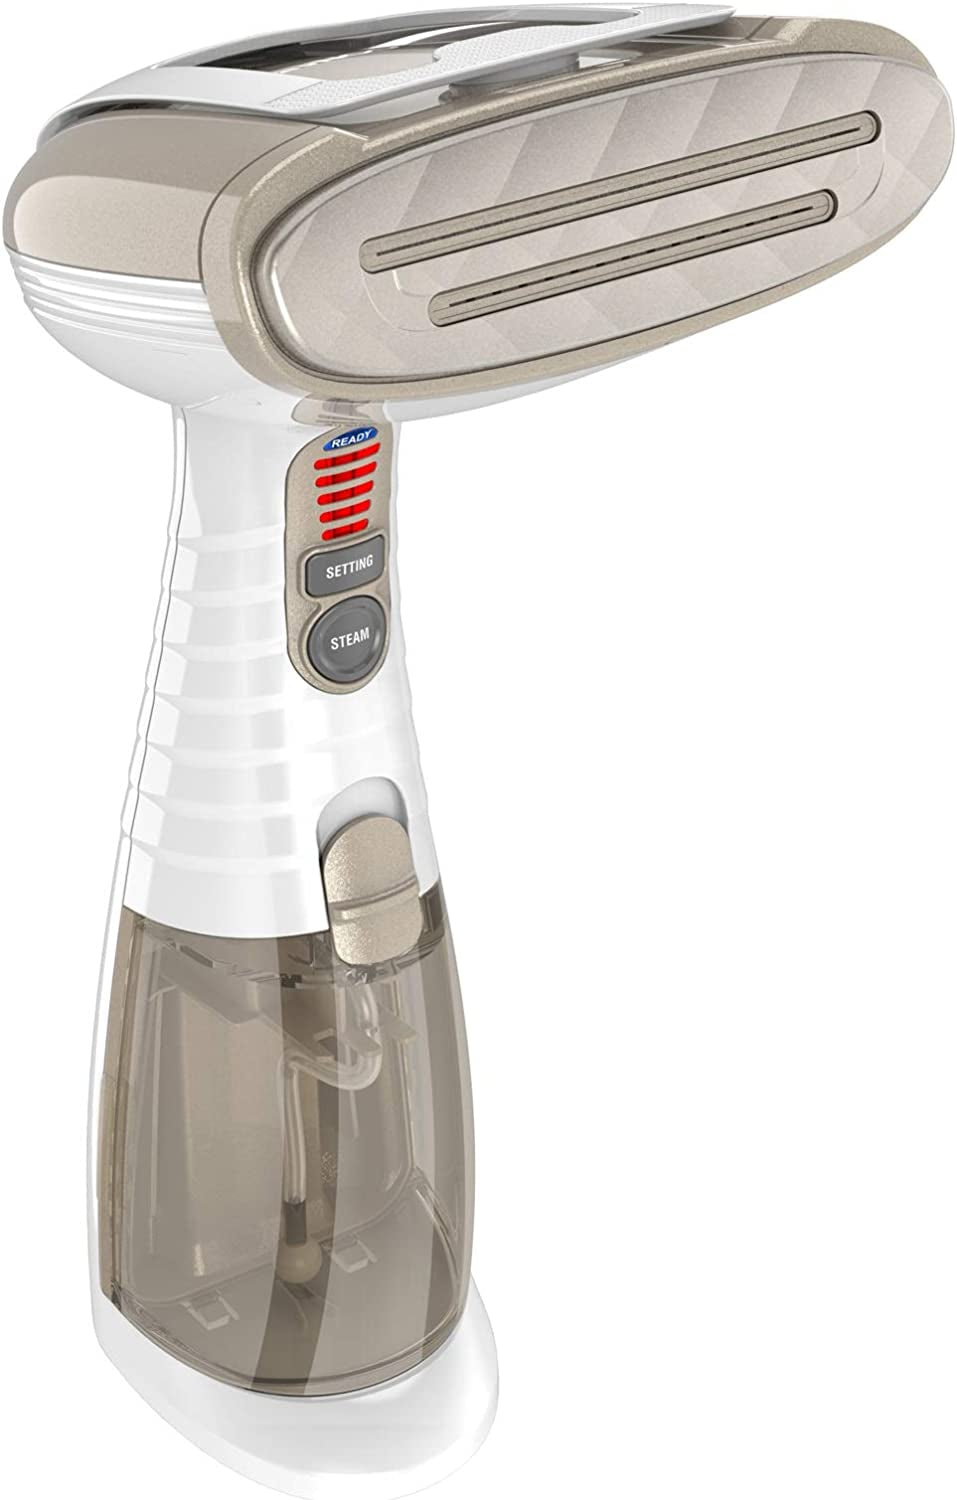 Handheld Garment Steamer for Clothes, Turbo Extremesteam 1875W, Portable Handheld Design, Strong Penetrating Steam, White / Champagne